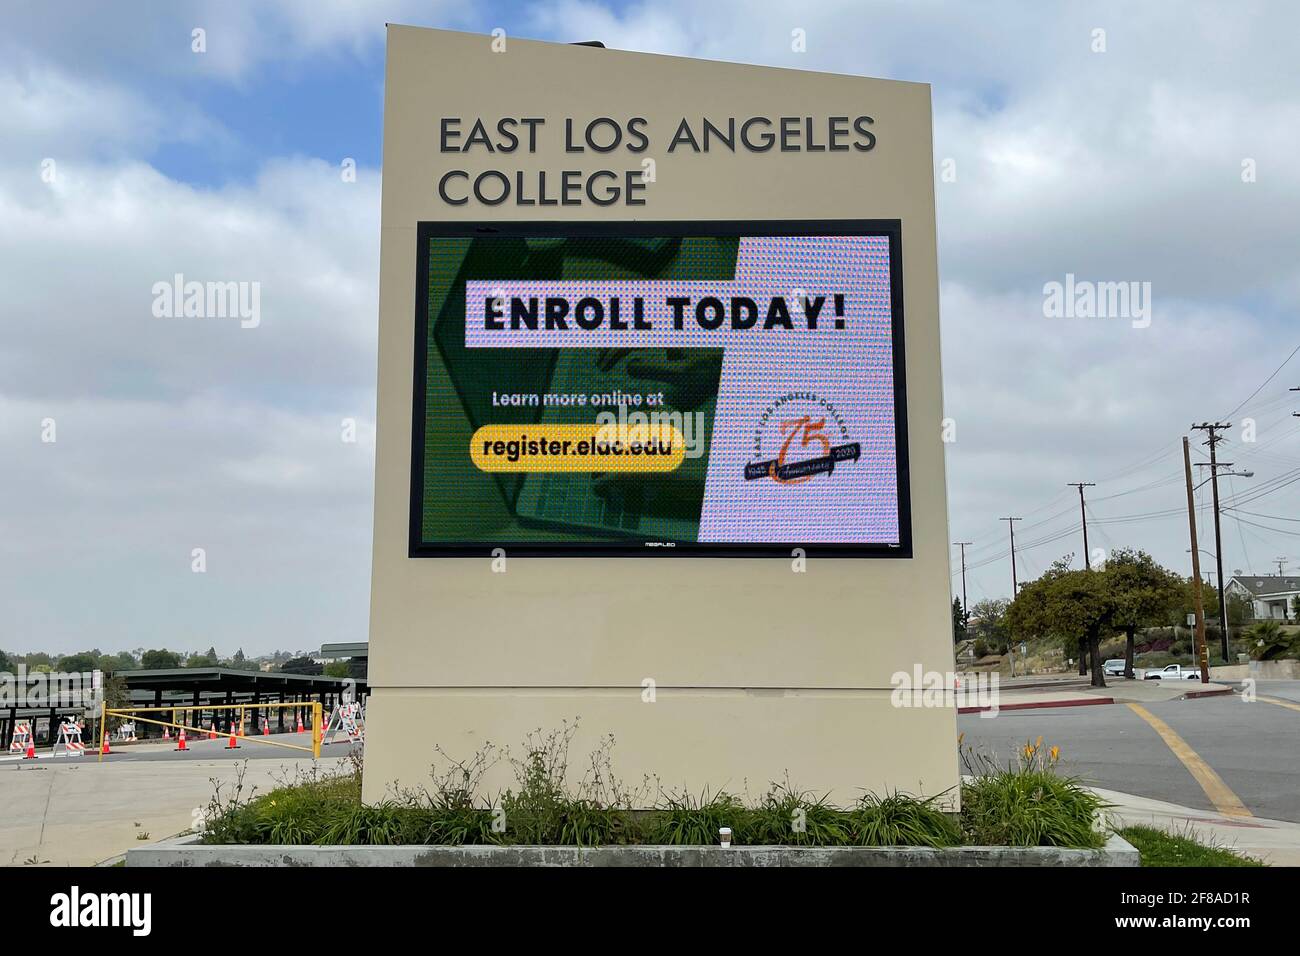 An online enrollment message on the marquee sign at East Los Angeles College, Monday, April 12, 2021, in Monterey Park, Calif. Stock Photo